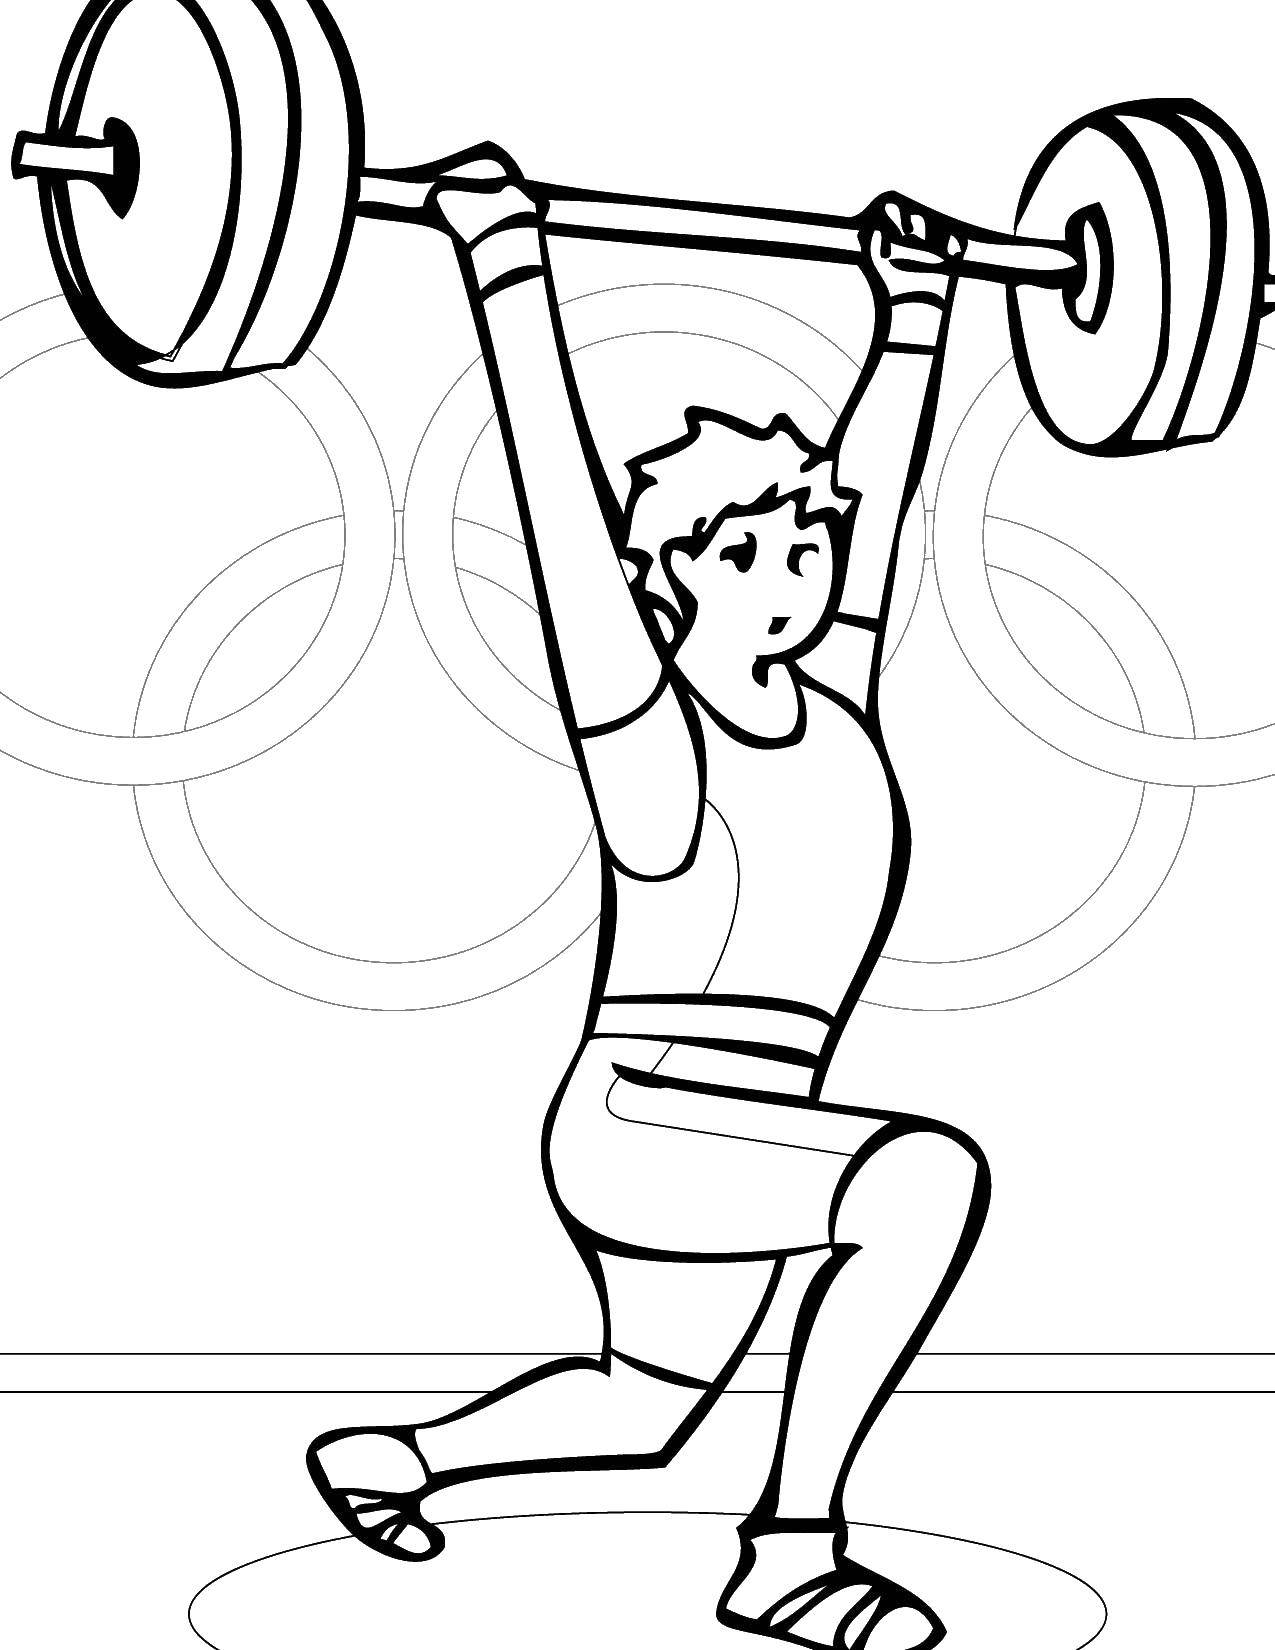 Coloring Olympic weightlifter. Category Sports. Tags:  Sports, Olympics.